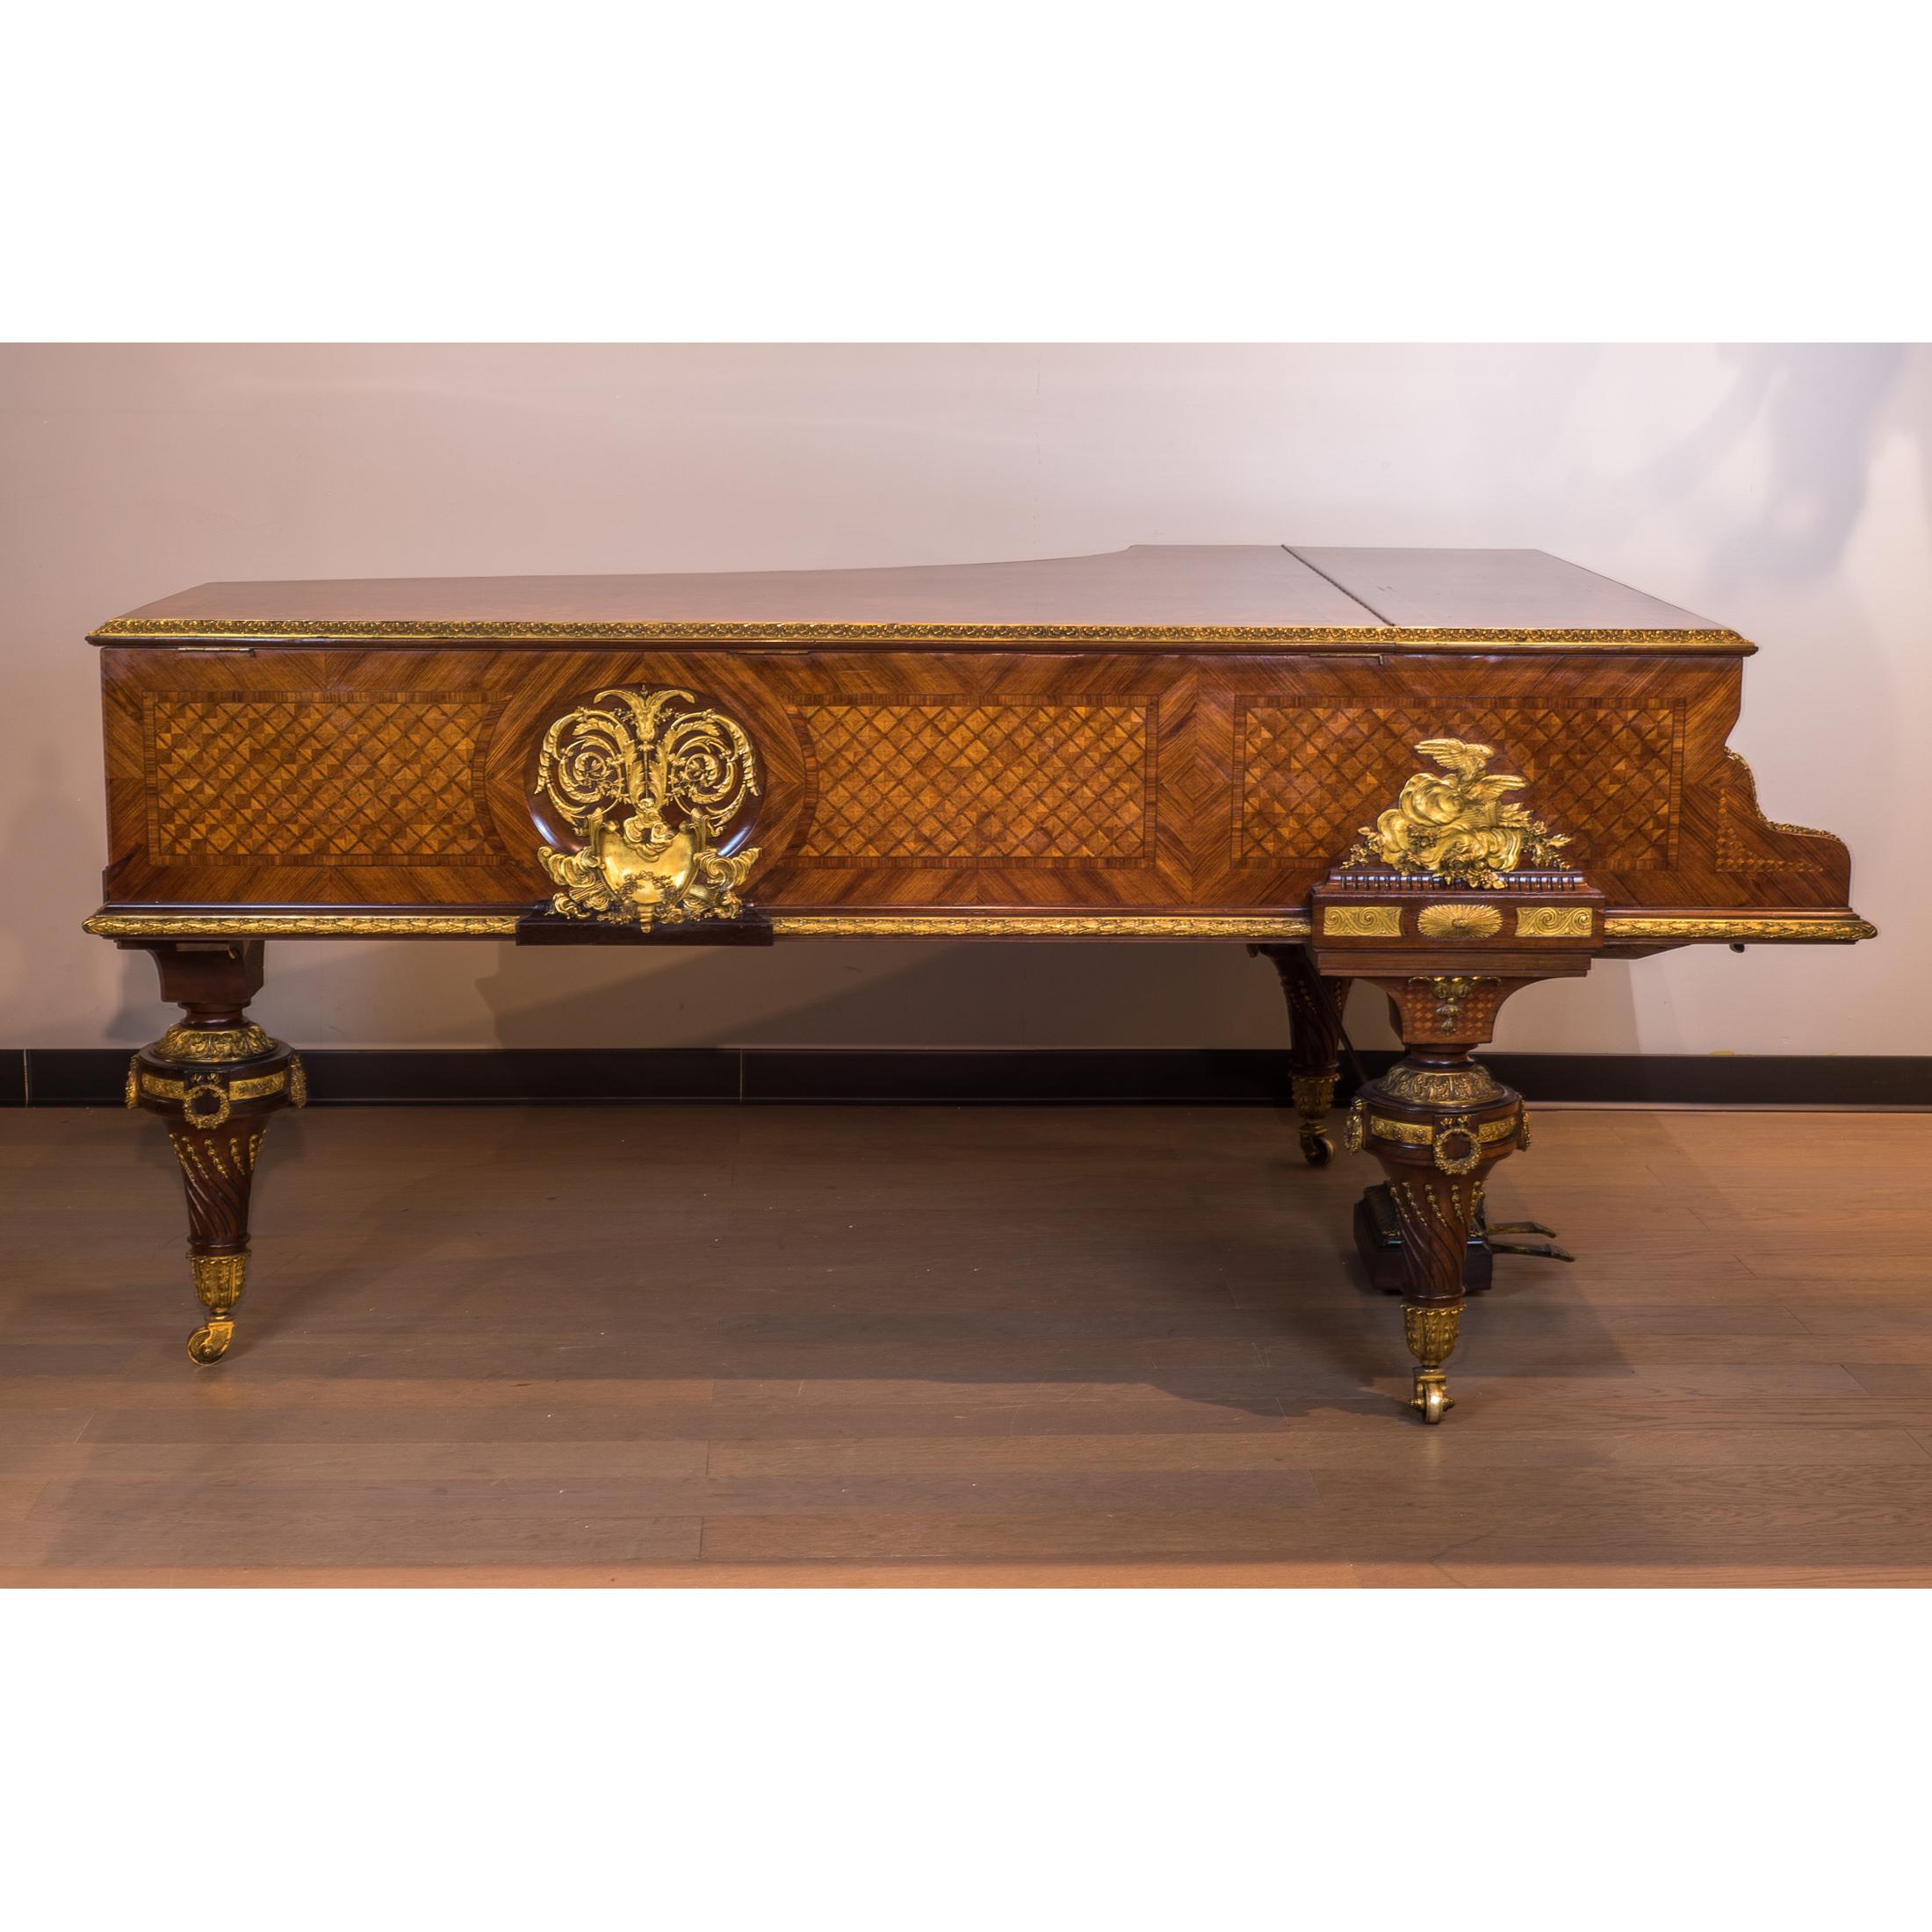 Gilt Important Ormolu-Mounted Amaranth, Kingwood and Satine Parquetry Grand Piano For Sale